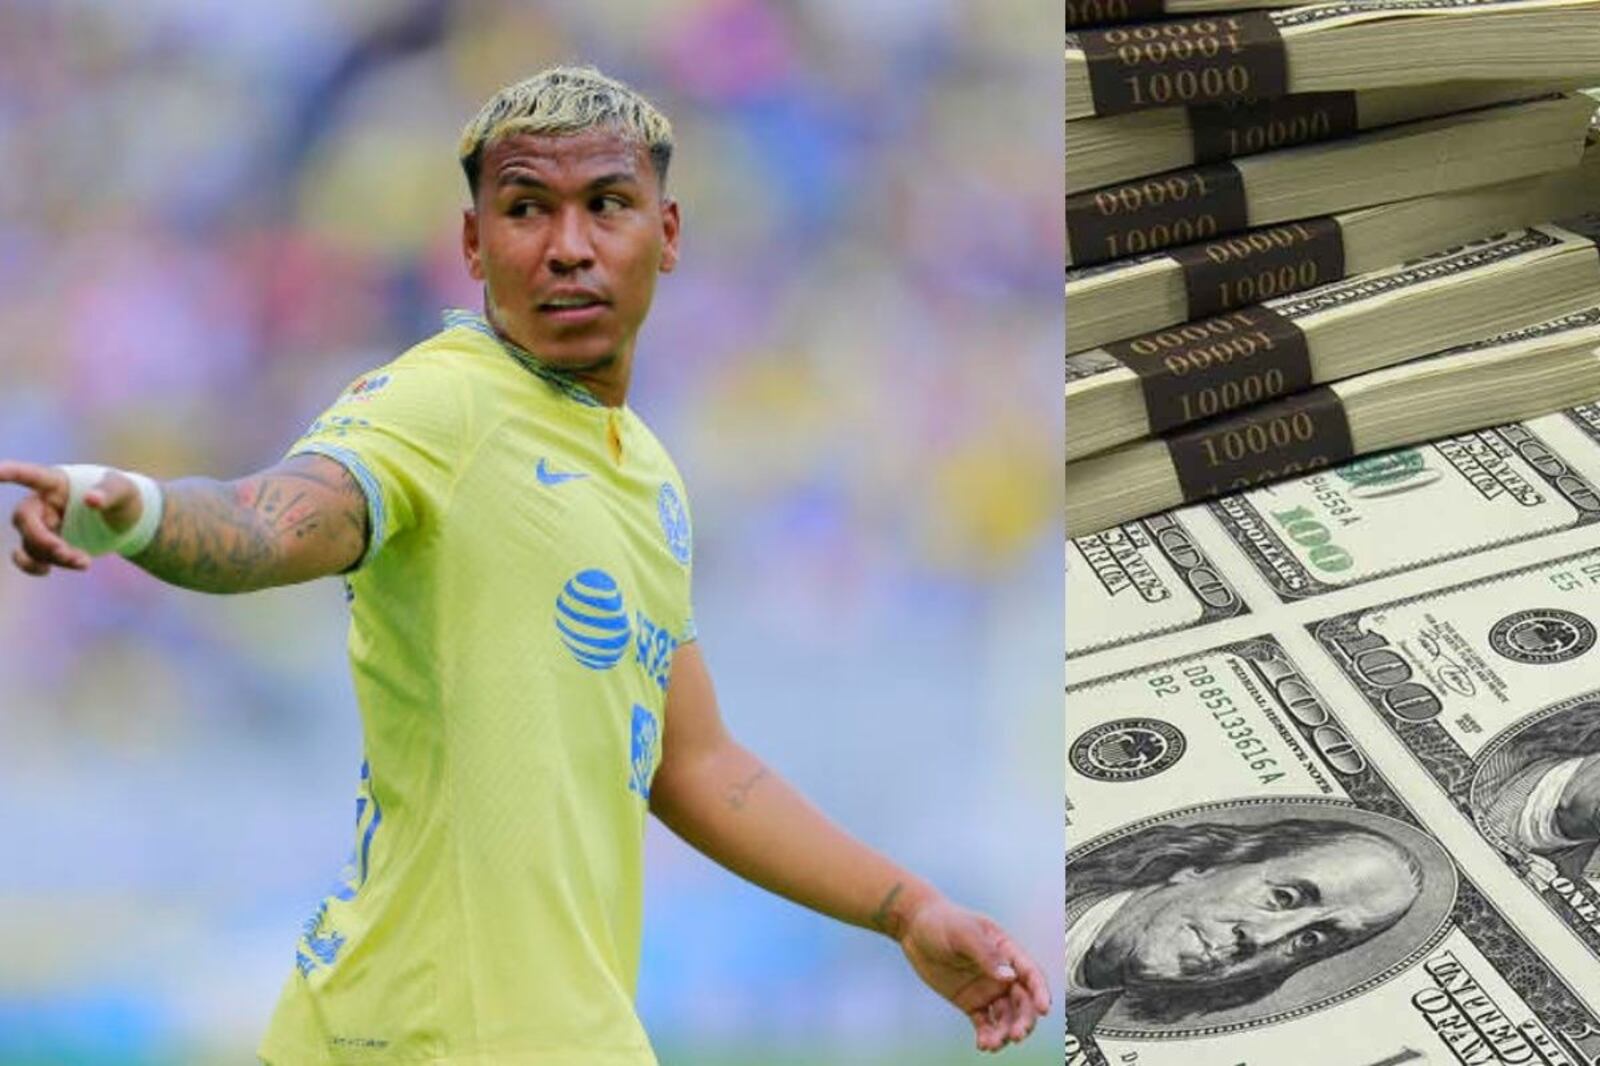 The millions of dollars that America is wasting with Roger Martínez